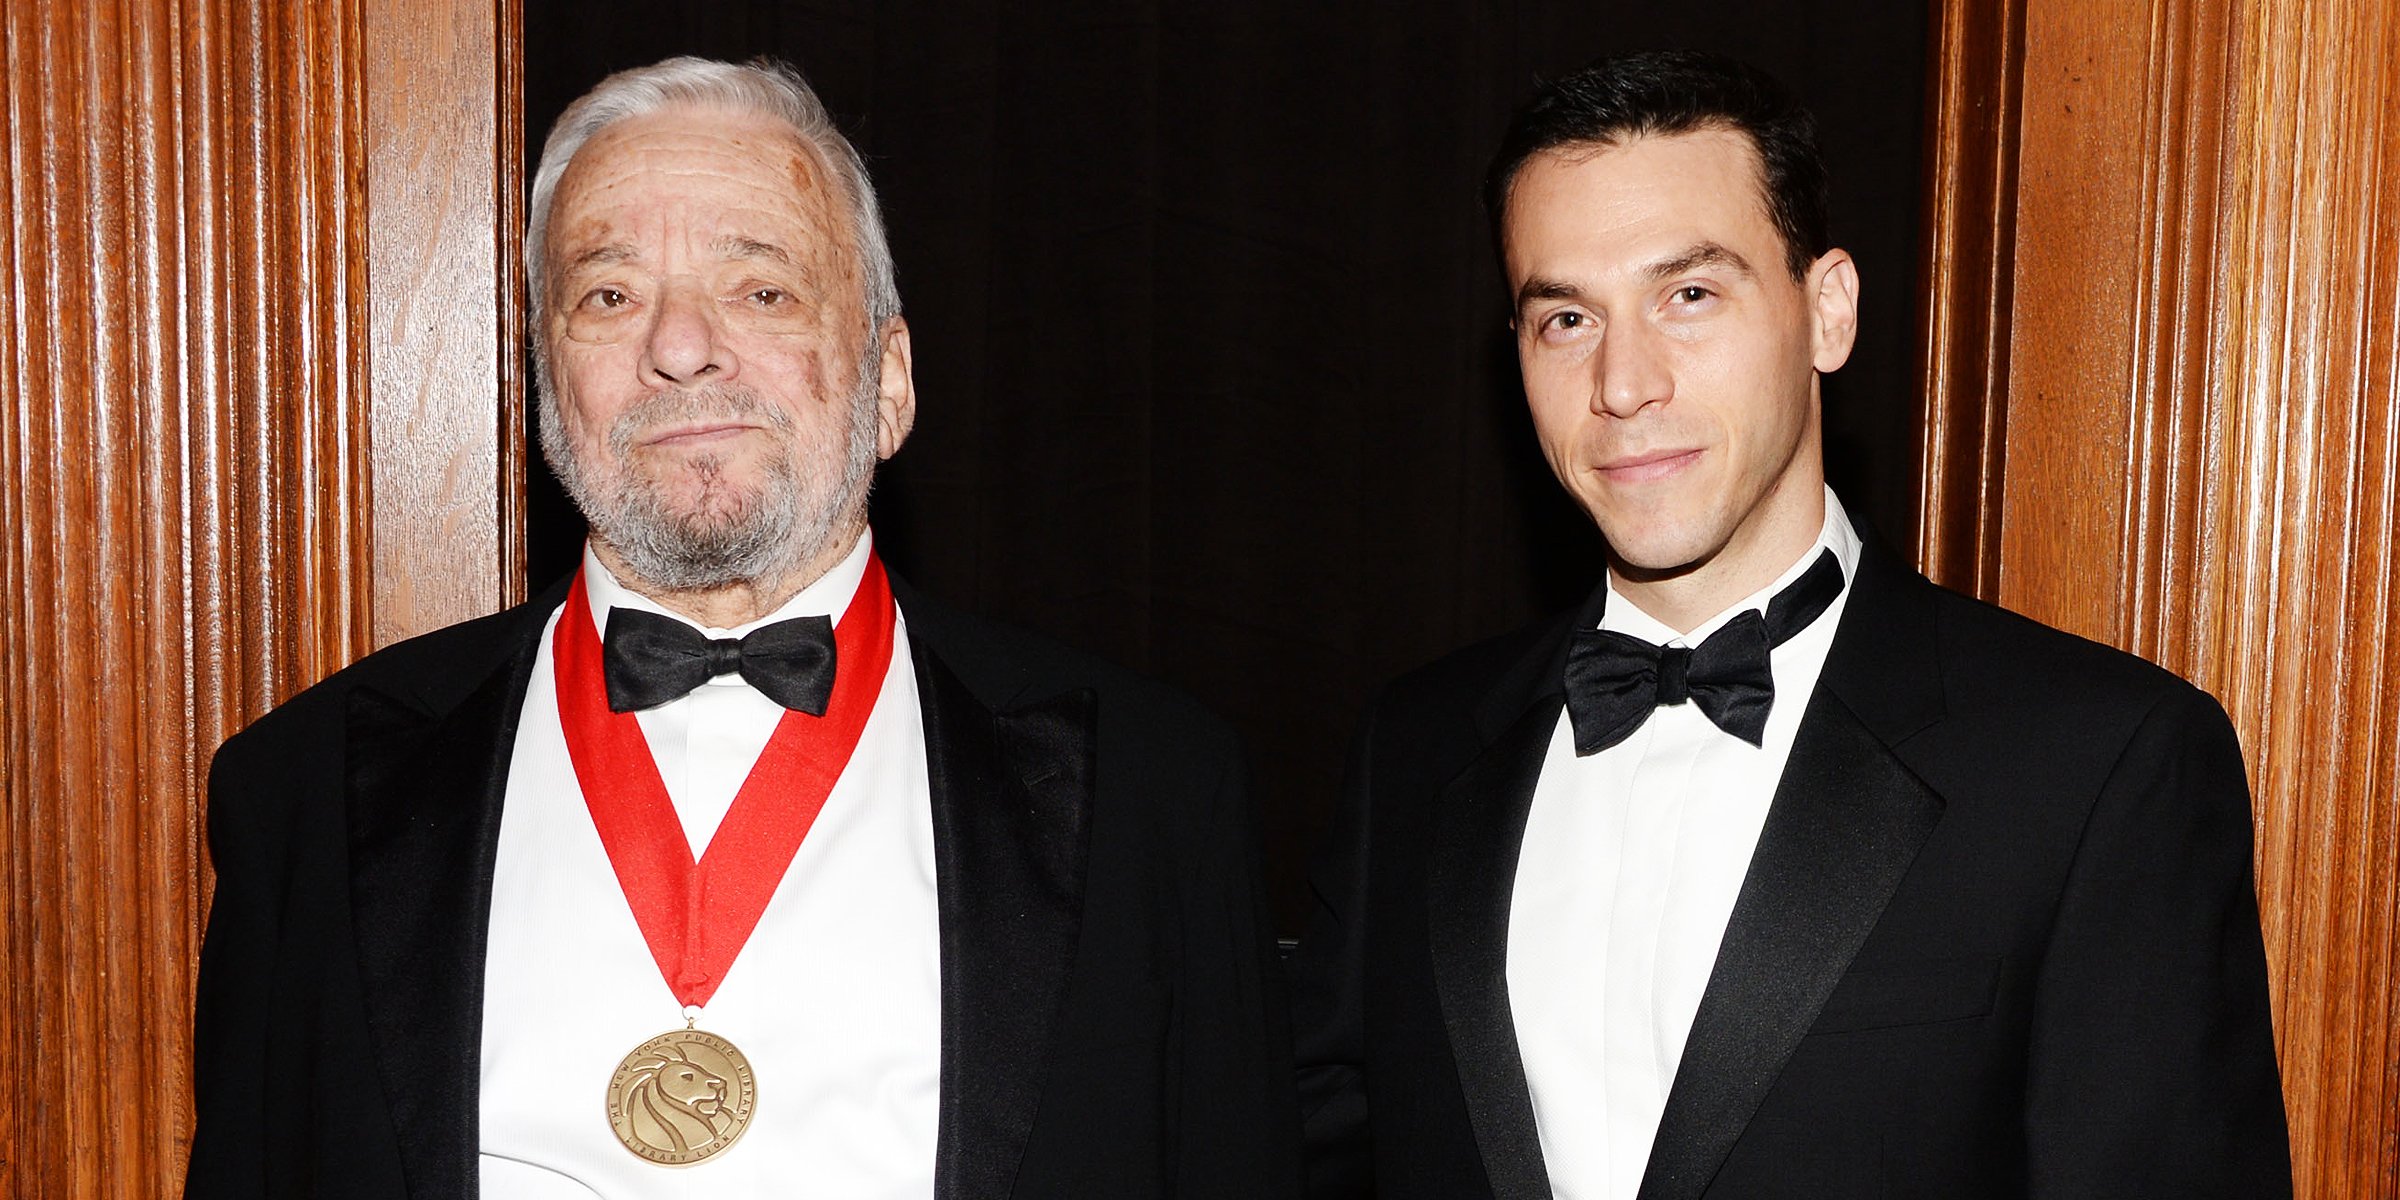 Stephen Sondheim and Jeff Romley. | Source: Getty Images